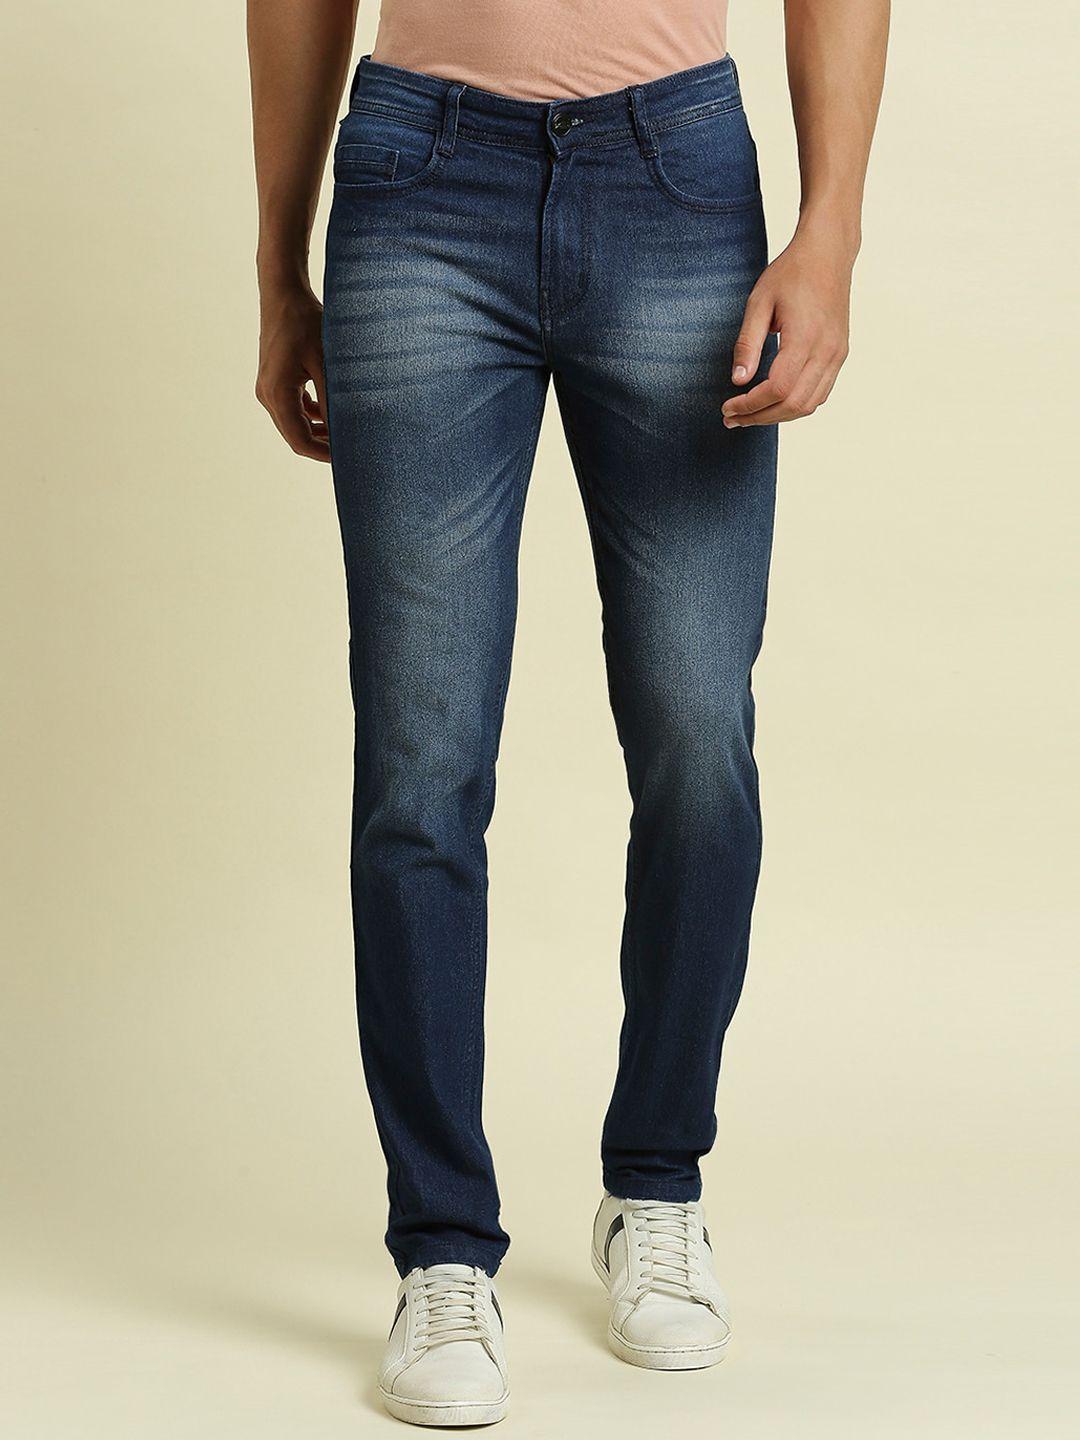 HJ HASASI Men Slim Fit Heavily Faded Stretchable Jeans